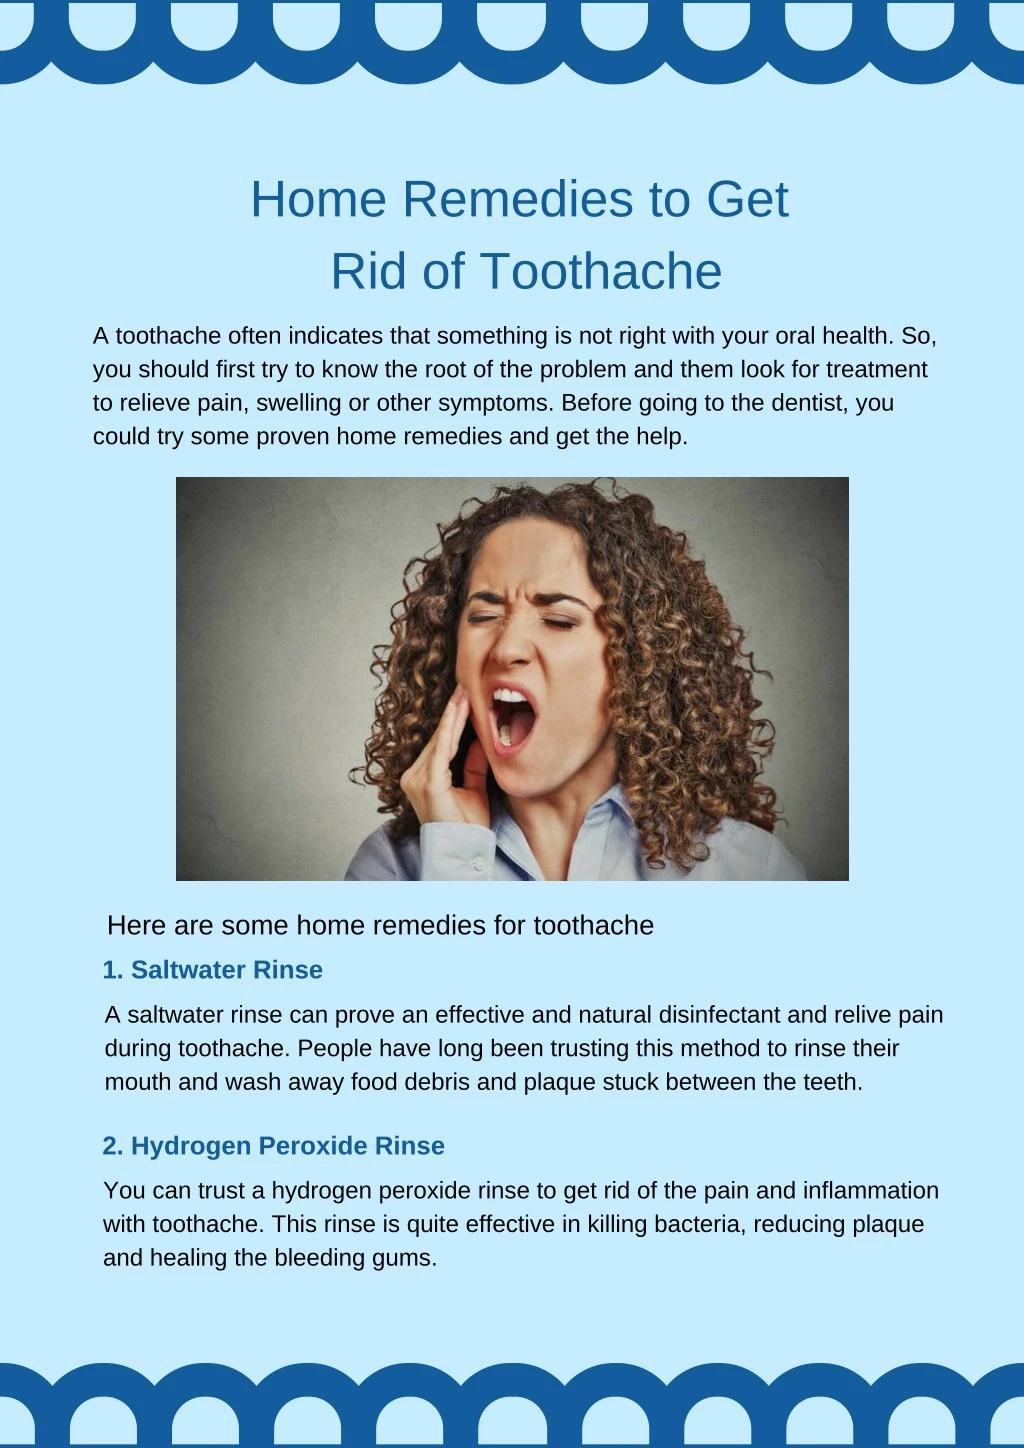 home remedies to get rid of toothache